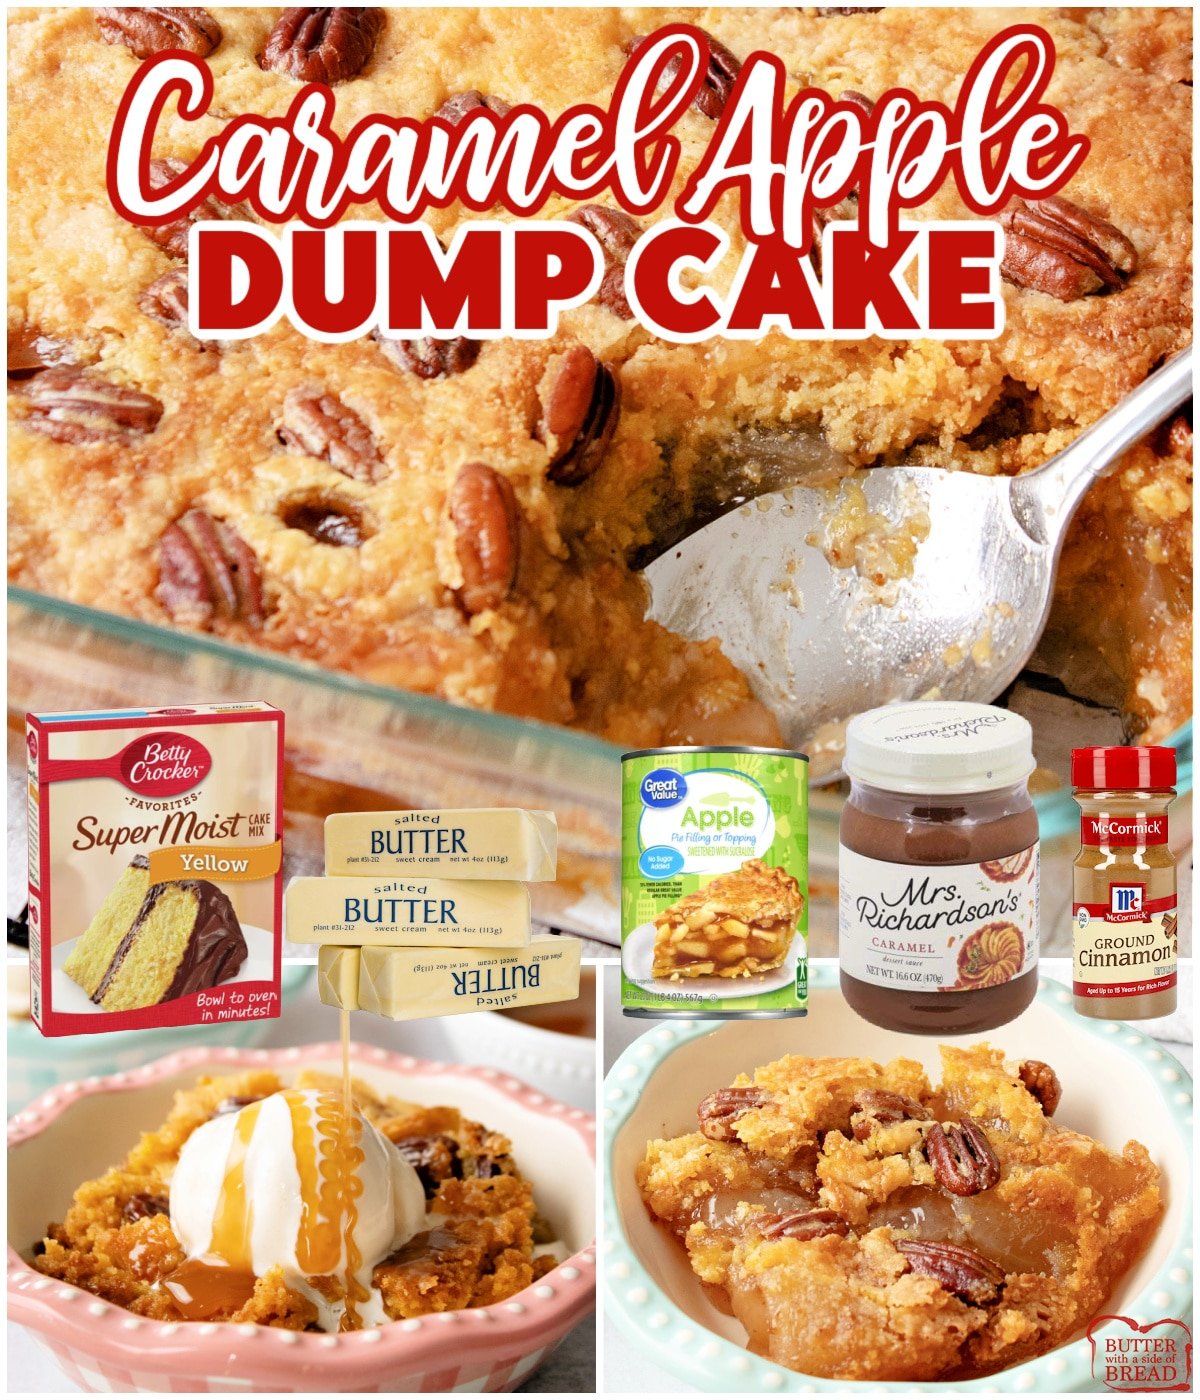 Caramel Apple Dump Cake made with only 6 ingredients! This simple dump cake recipe is made with a cake mix, butter, apple pie filling, caramel, cinnamon and pecans. Super easy dessert recipe that is perfect for fall!